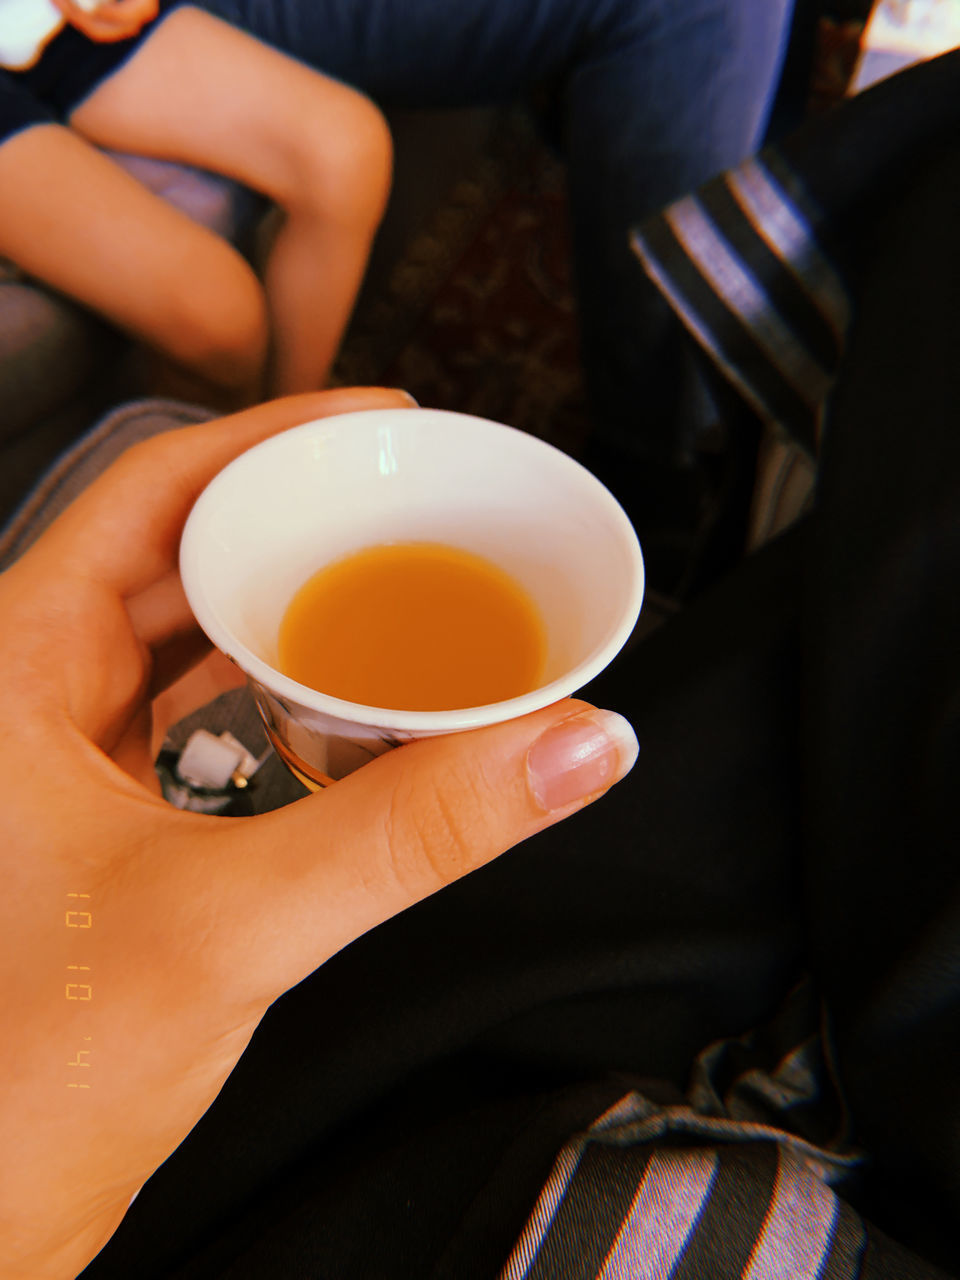 CLOSE-UP OF PERSON HOLDING CUP OF TEA